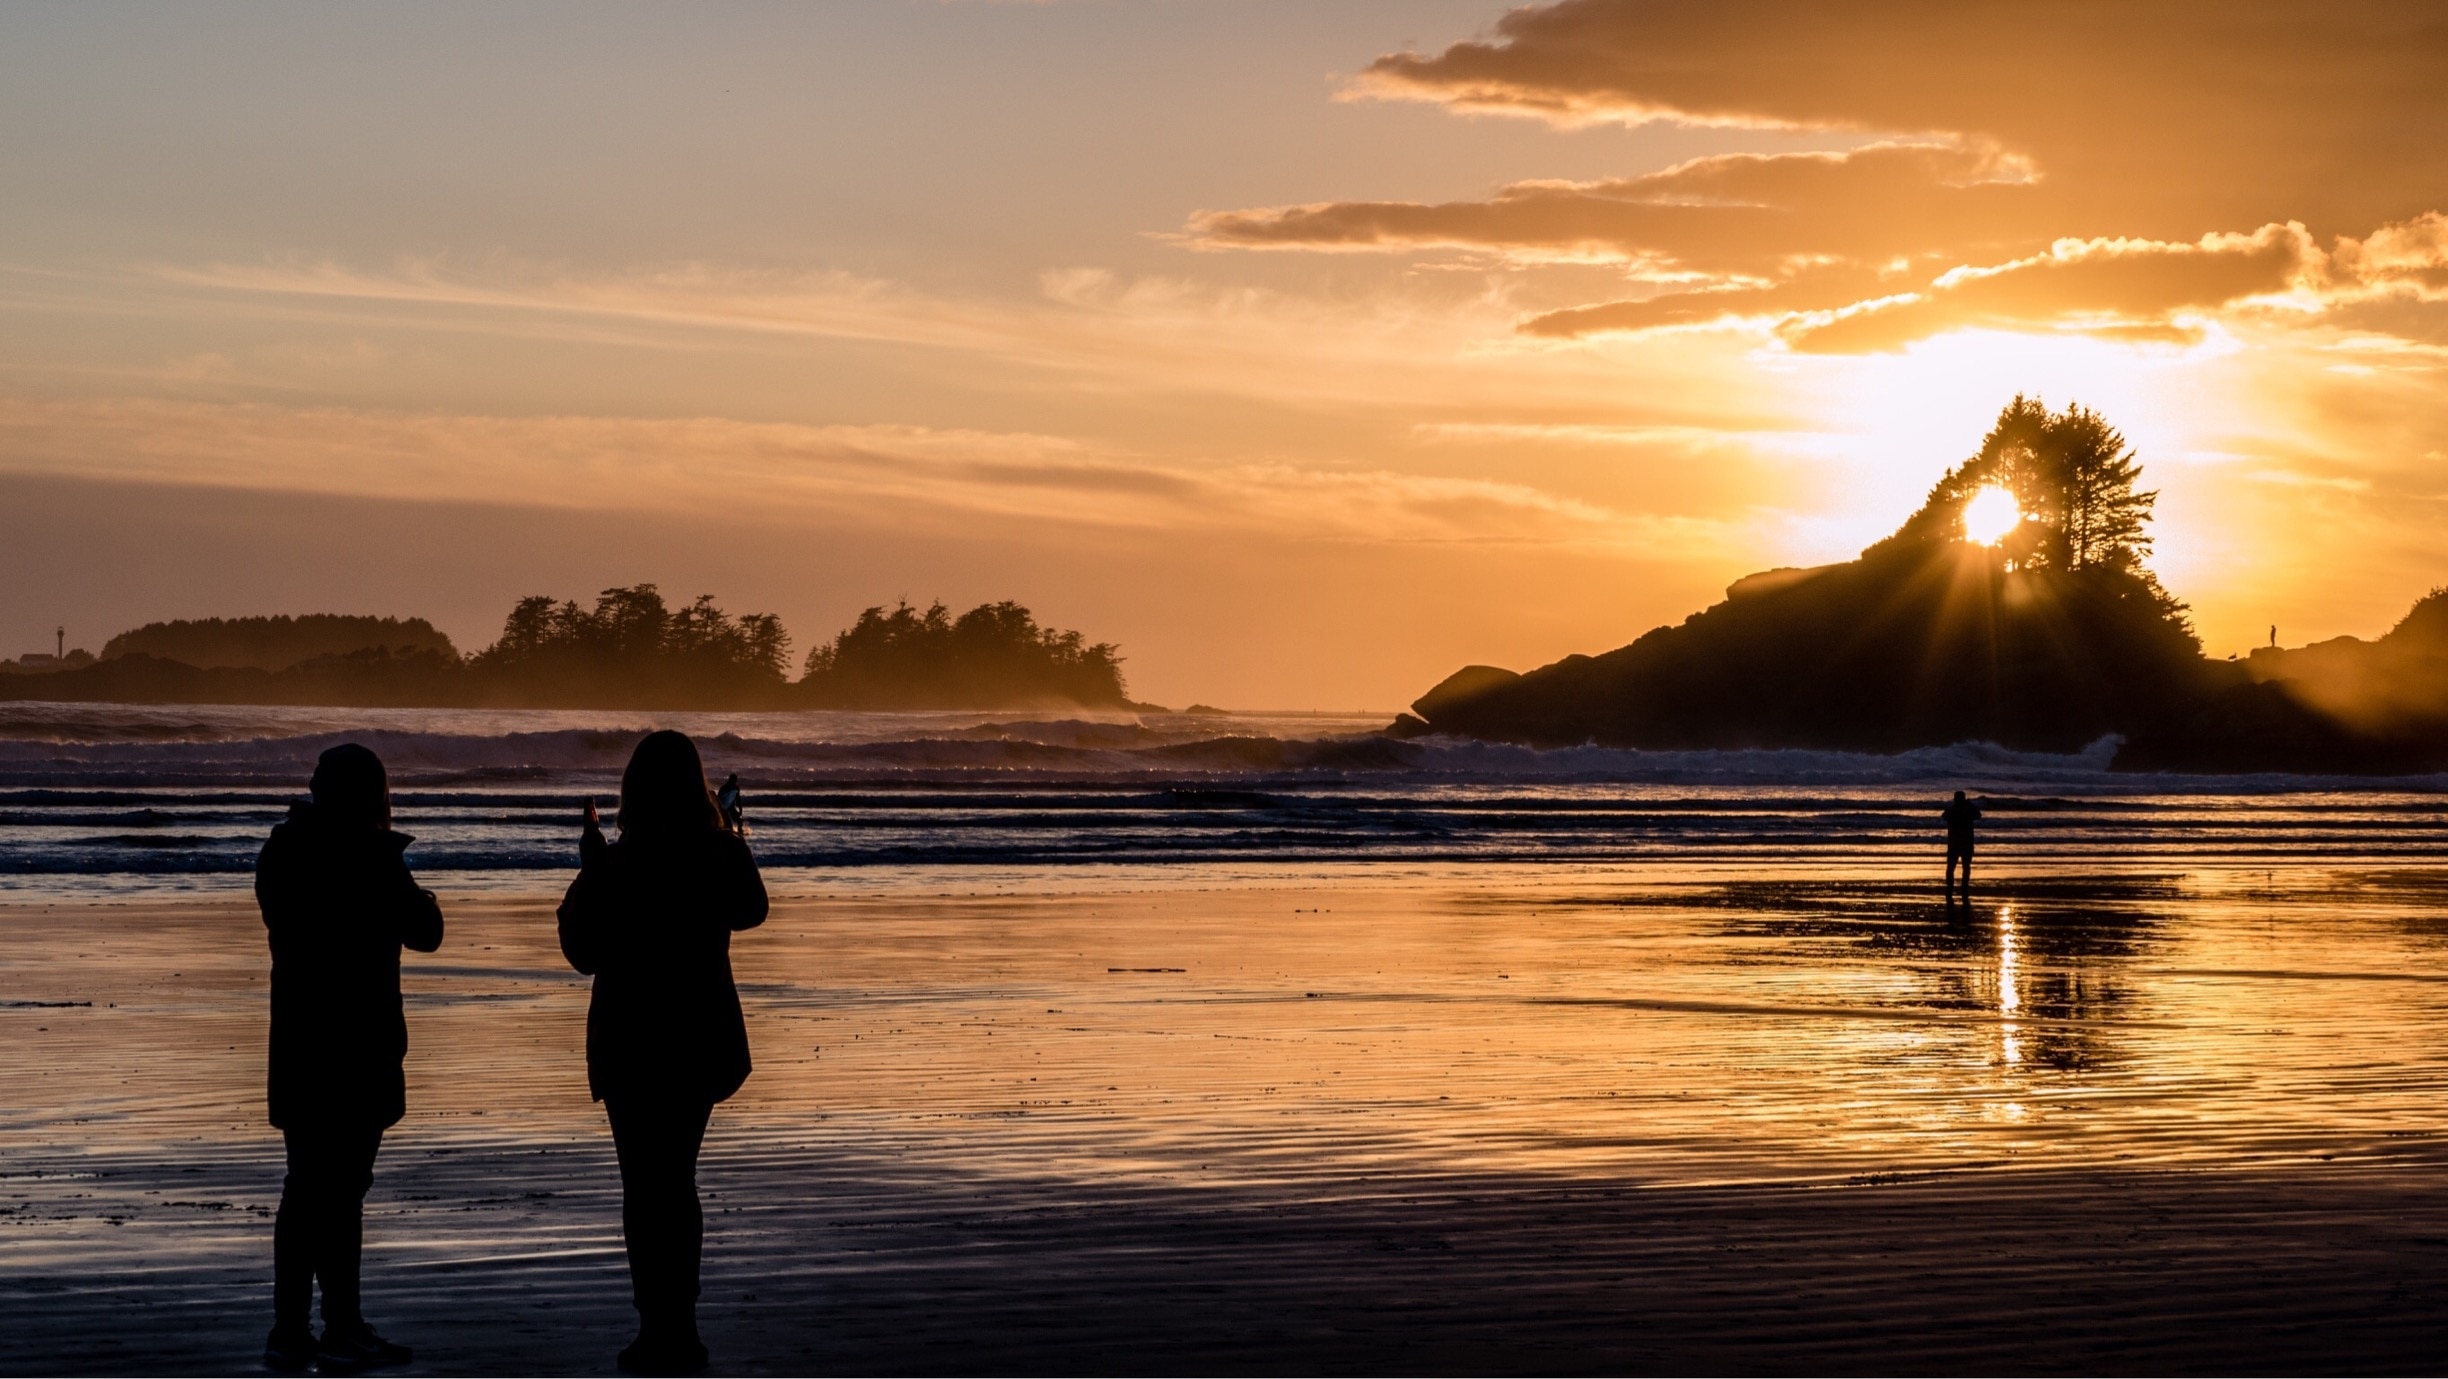 Witness the most awesome sunsets at Cox Bay Beach near Tofino.
#beach #sunset #sunsetlovers #outdoors